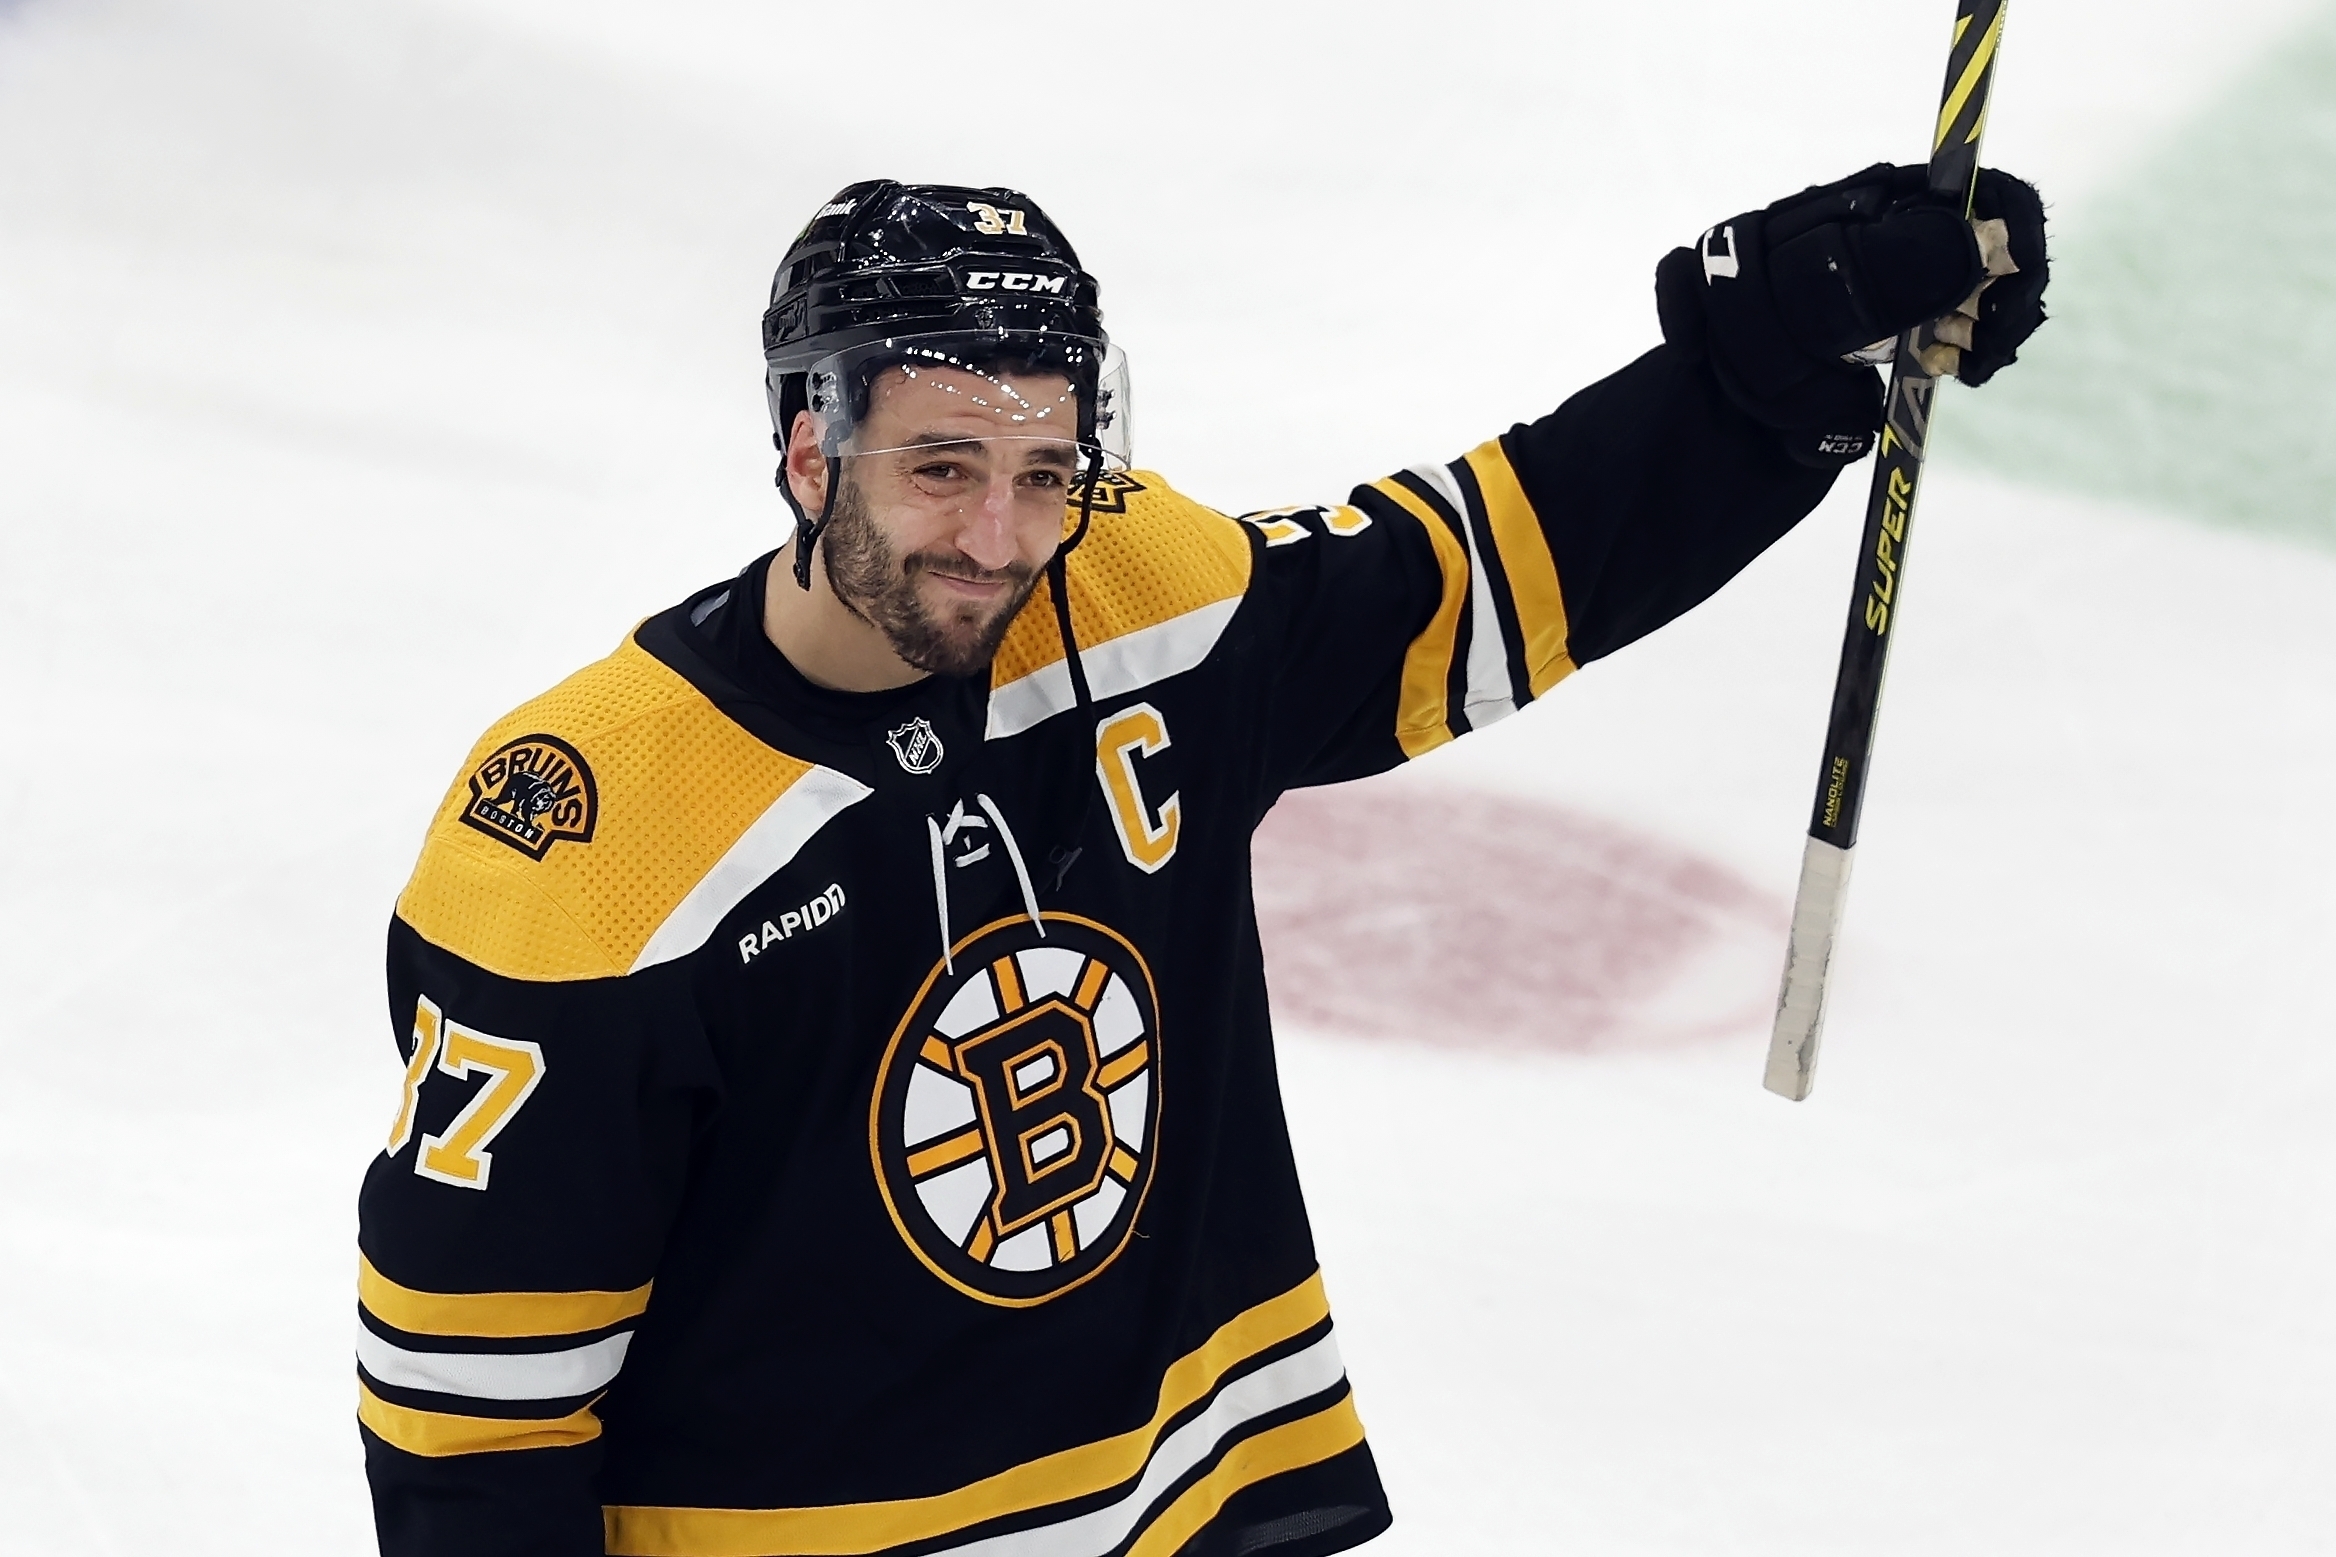 Bruins beat the winless Sharks 3-1 for their 3rd straight win